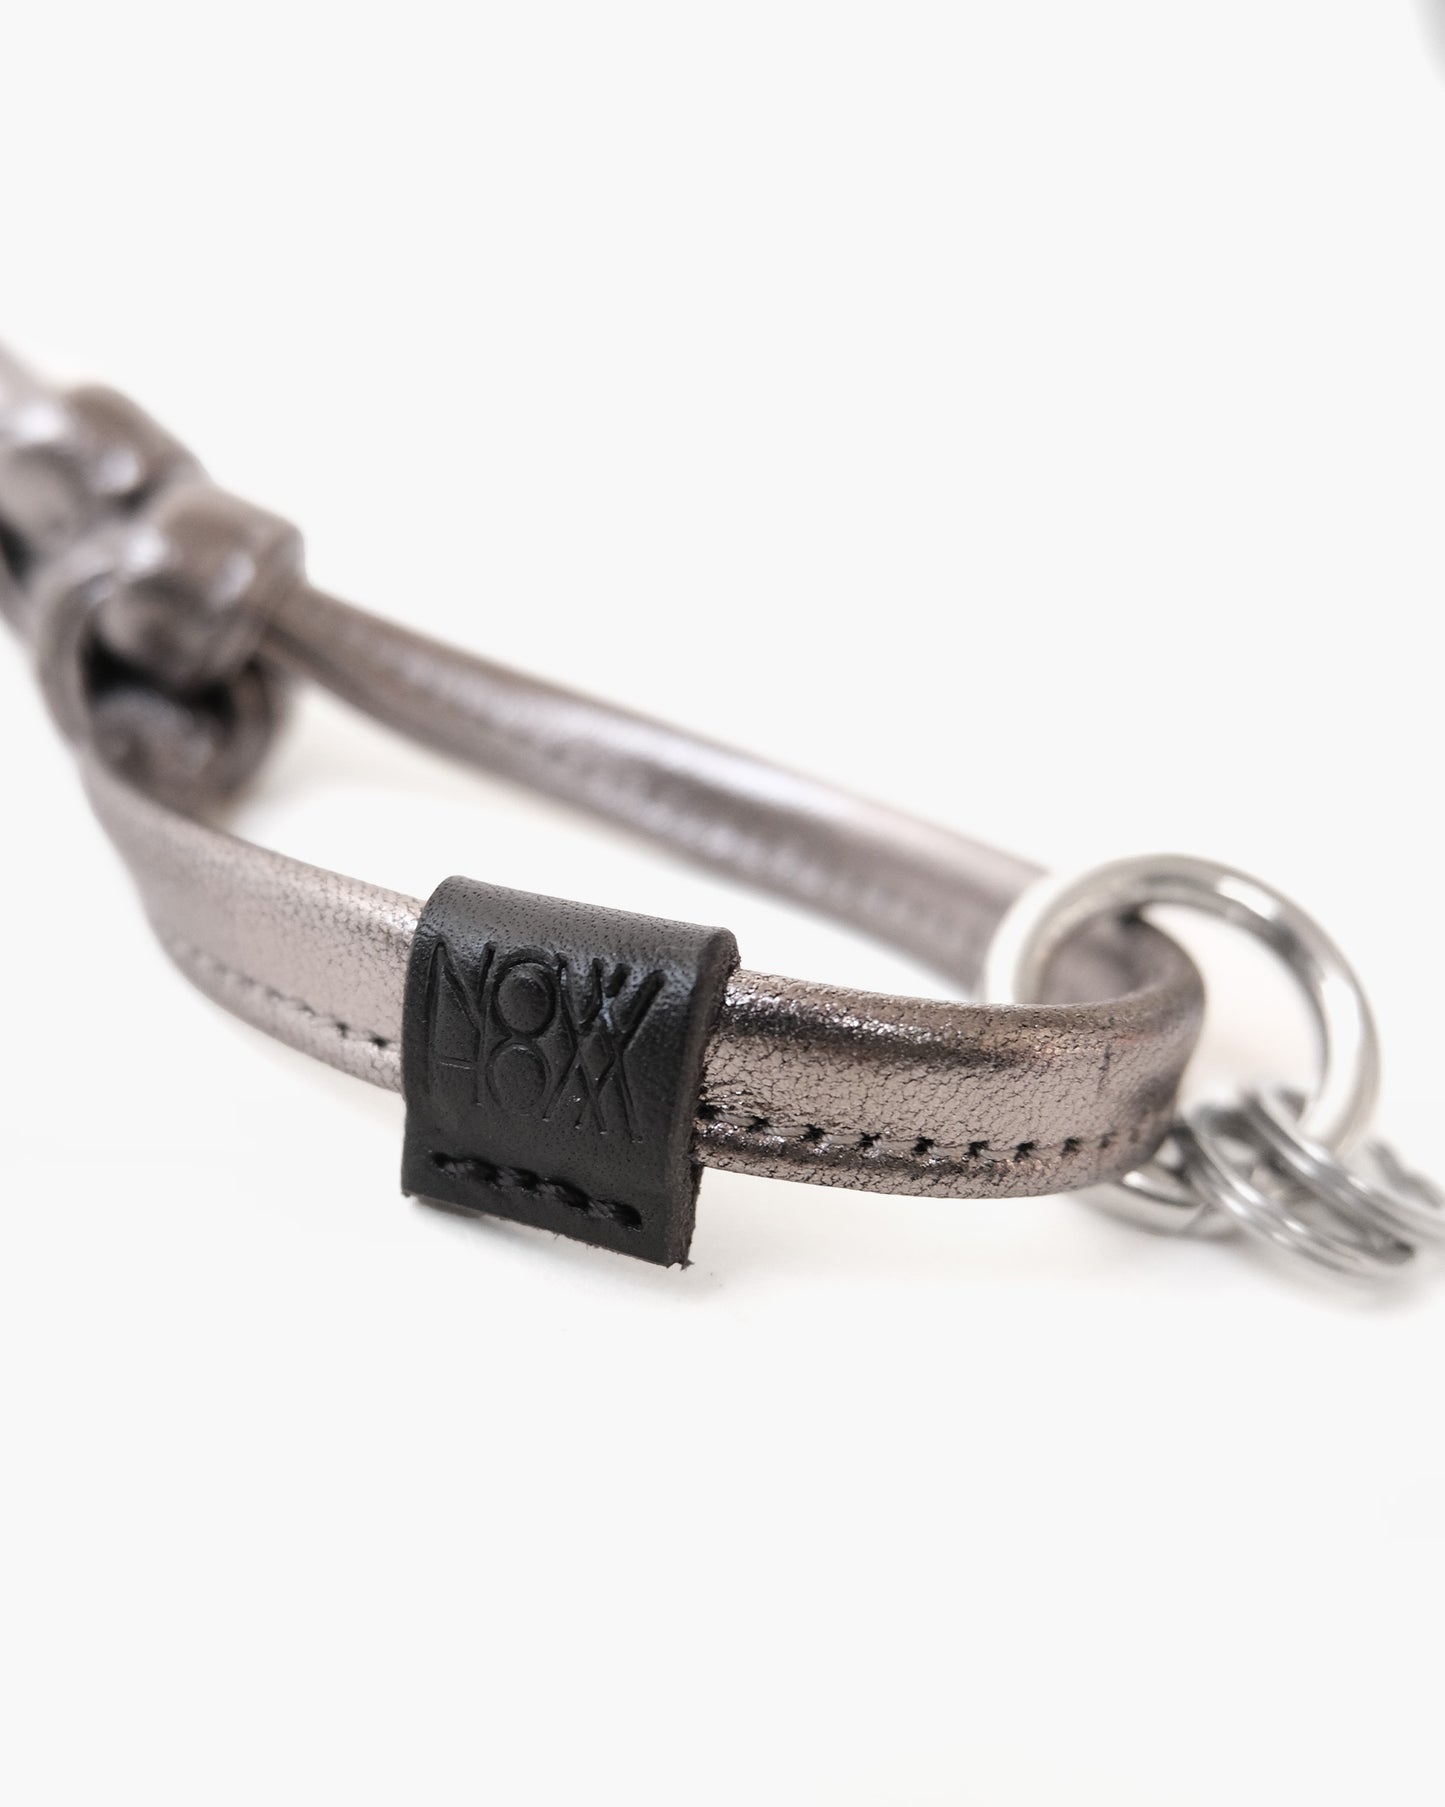 "NOWHOW" Key String -Silver